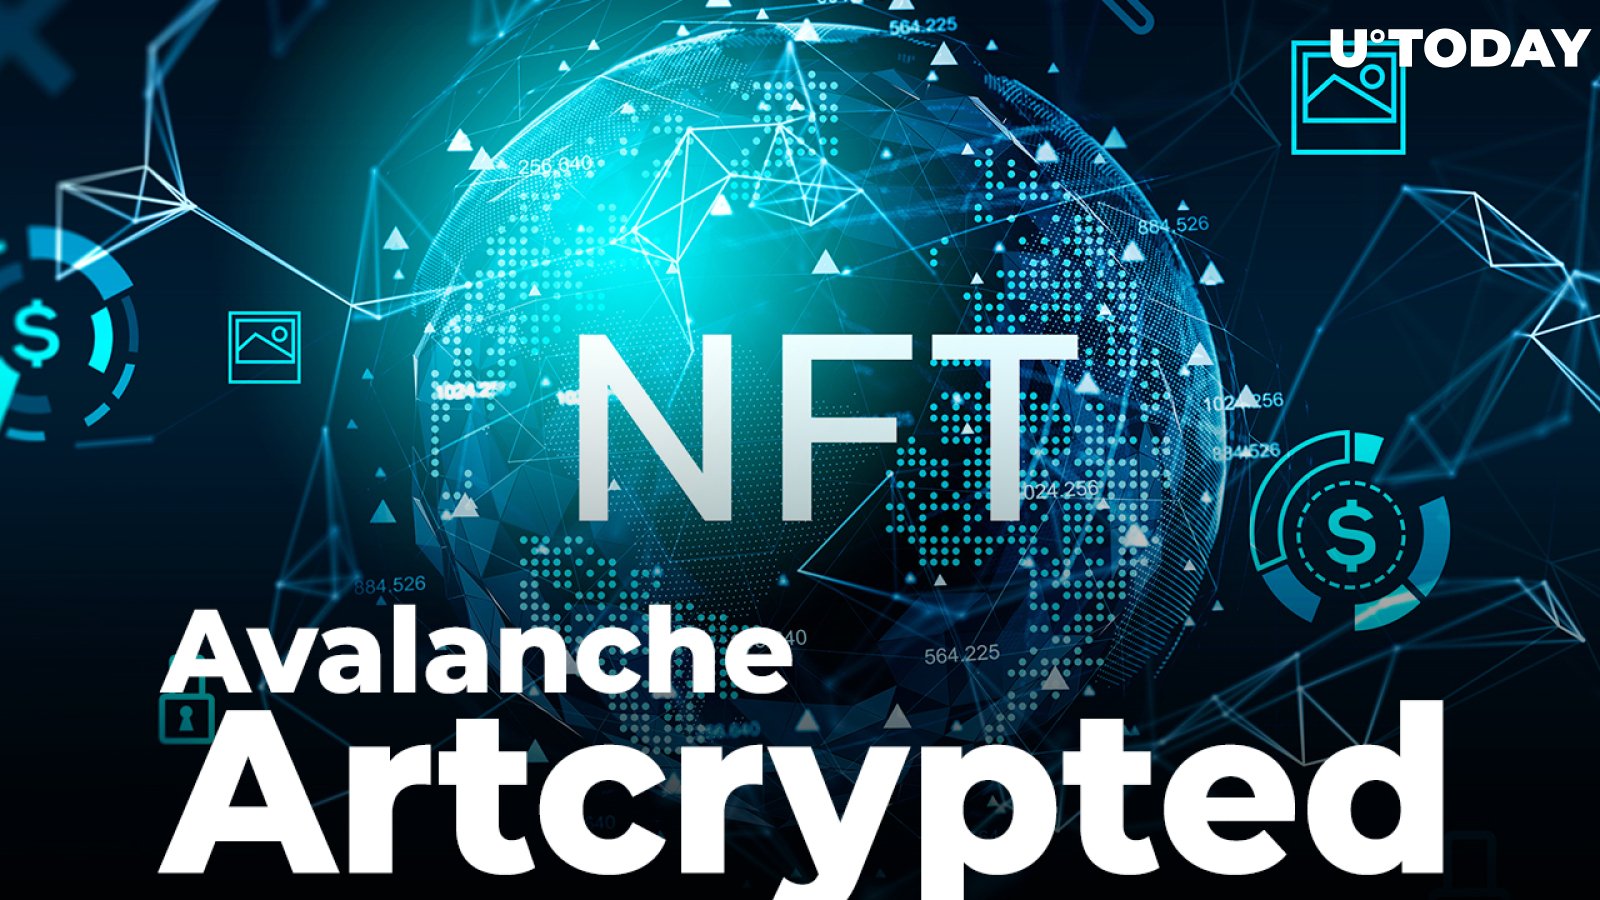 Avalanche to Host Novel NFT Marketplace Artcrypted: Here's Why It Is Special